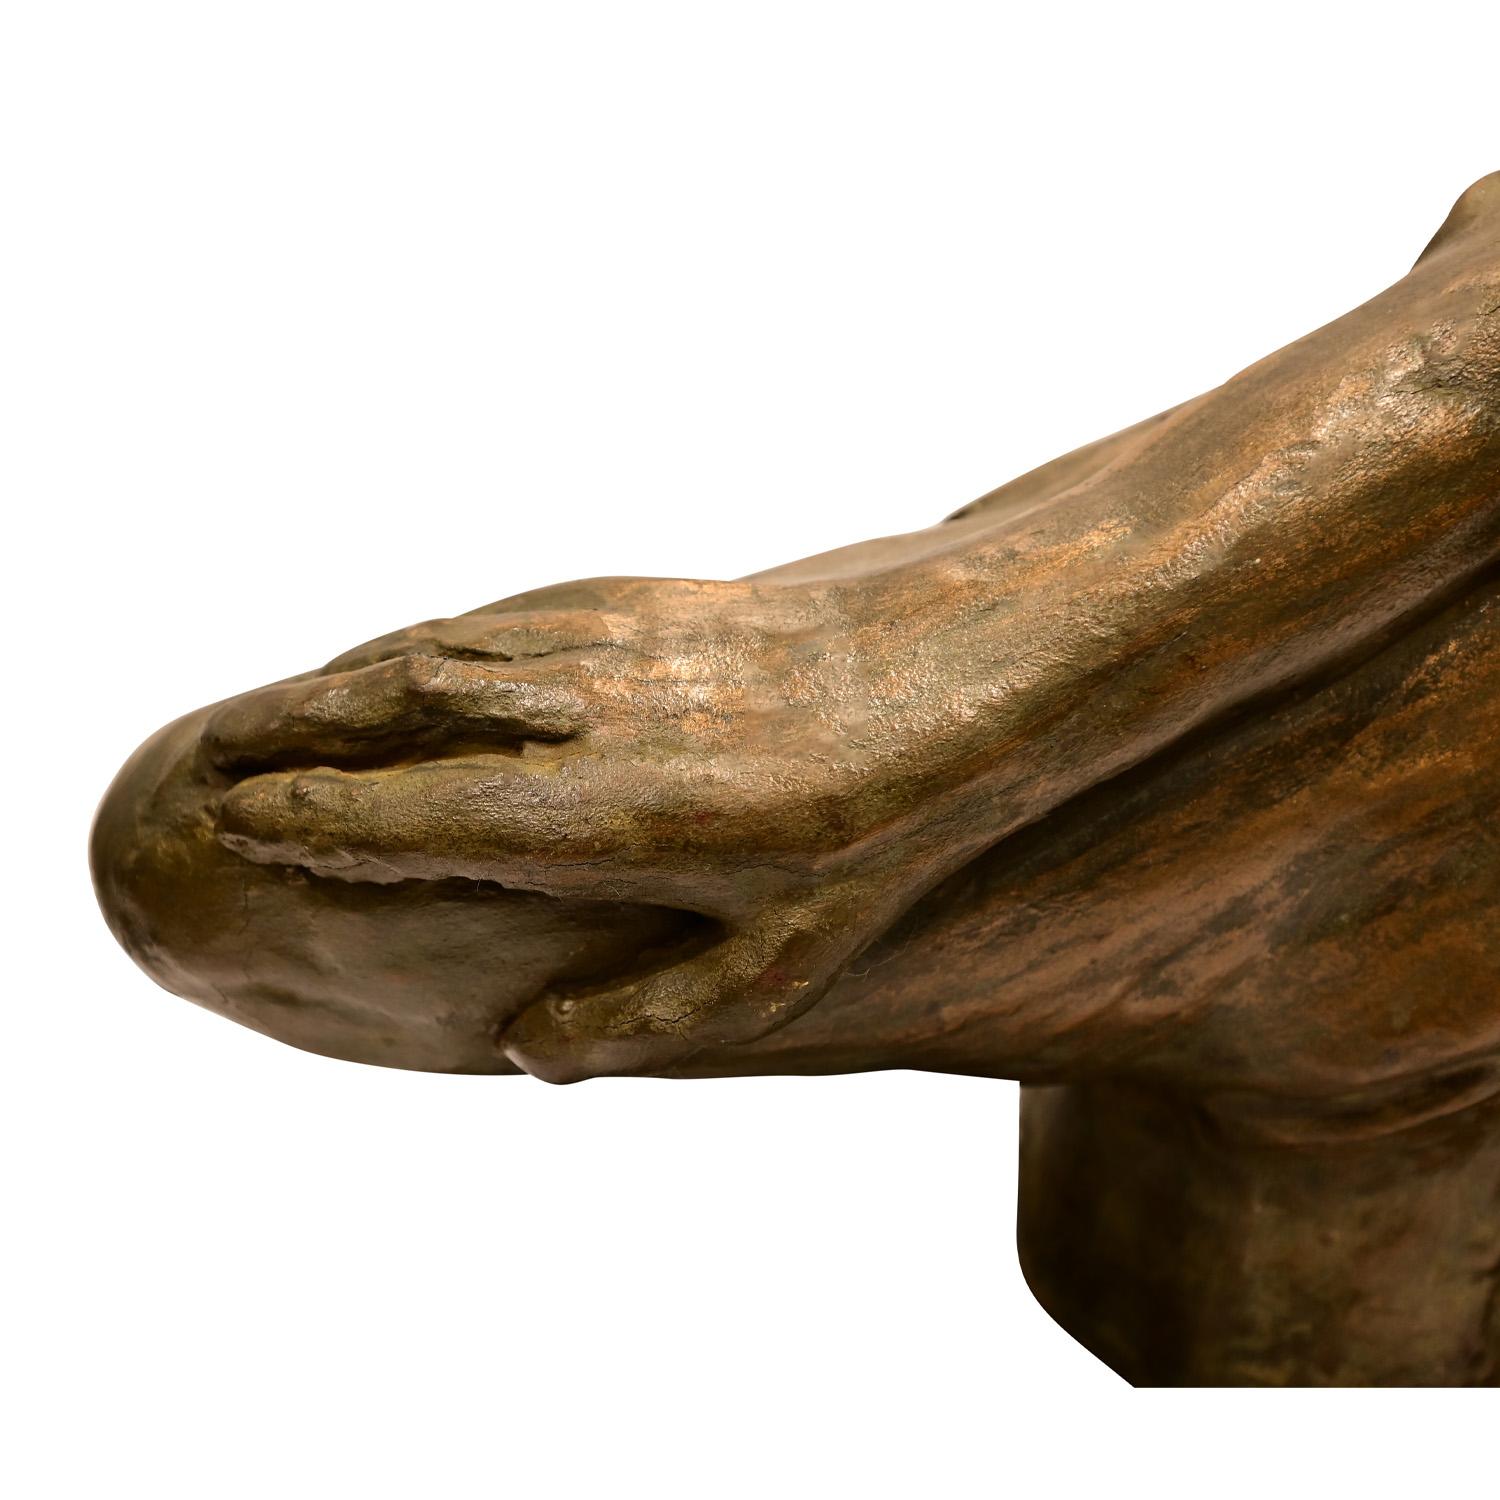 Hand-Crafted Philip and Kelvin LaVerne Arabesque Torso Sculpture in Bronze 1970s Signed For Sale